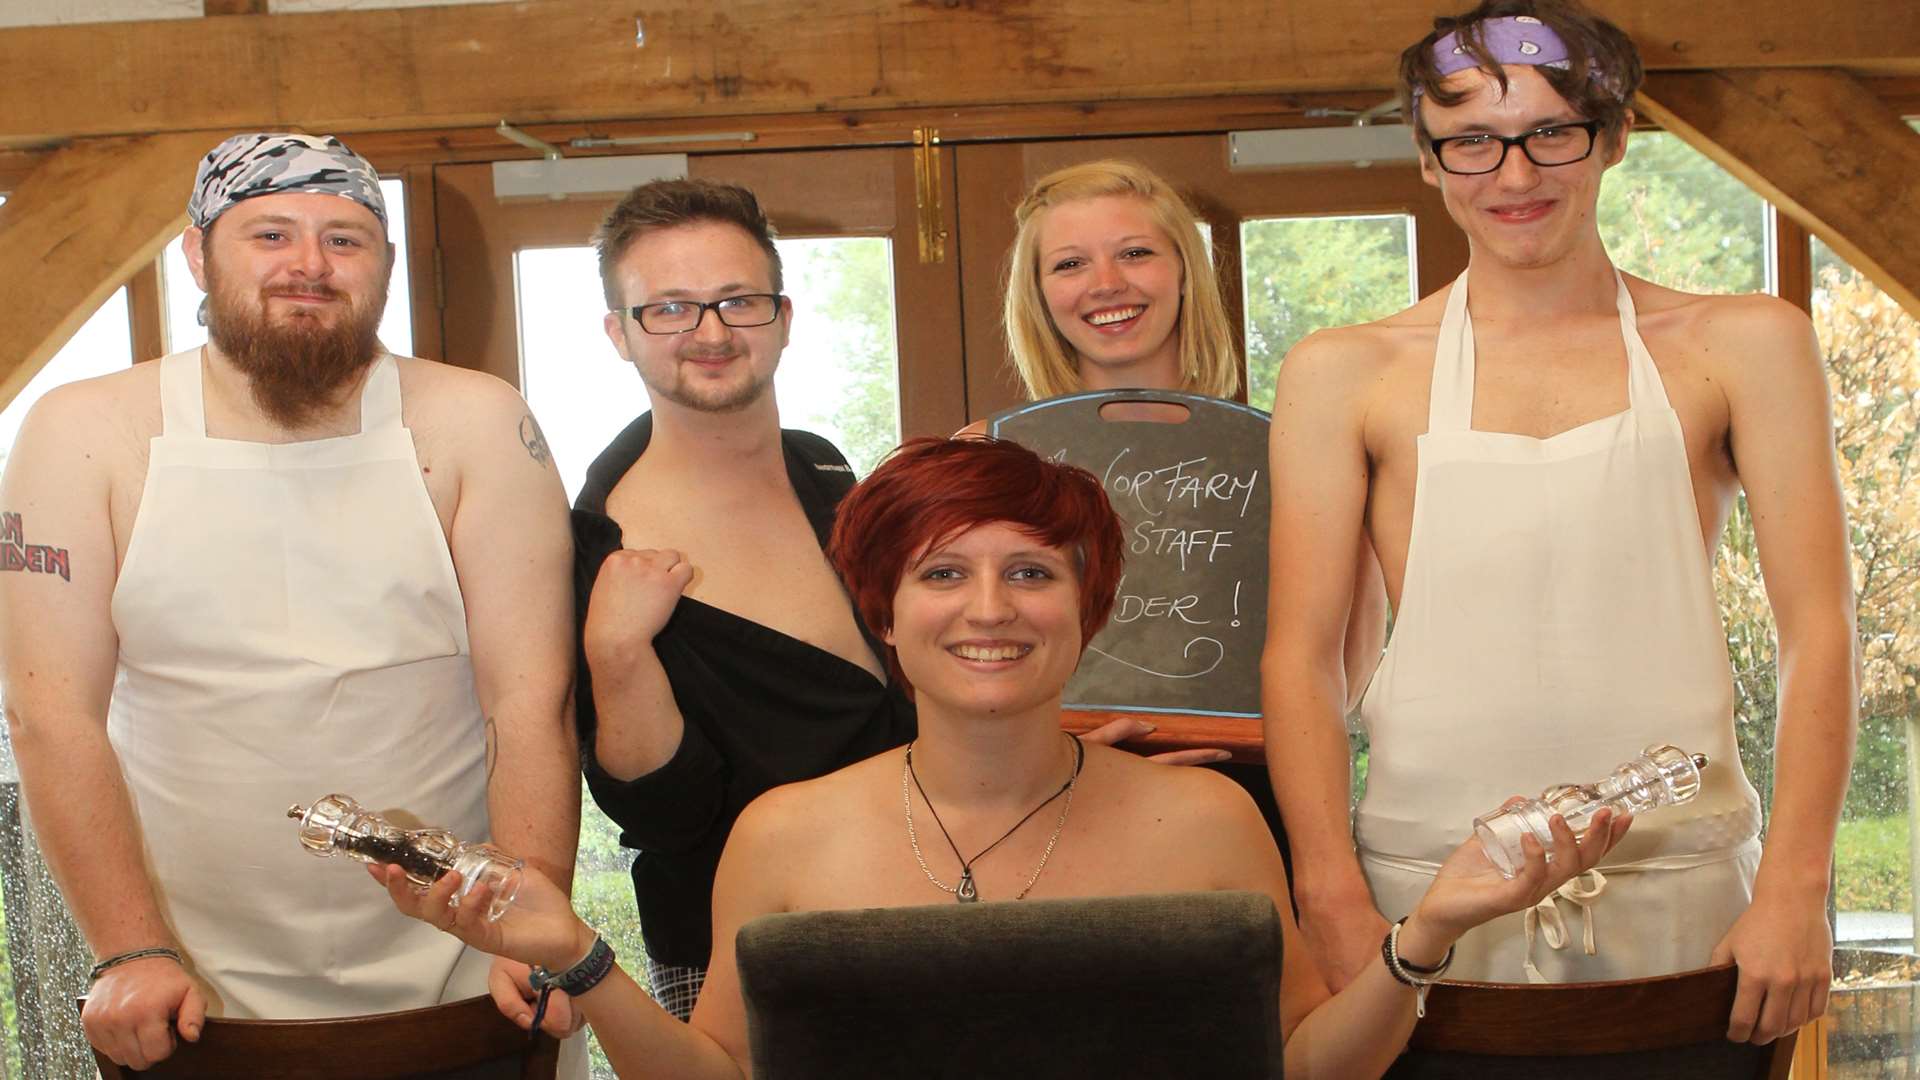 Staff posed semi-nude for a calendar to raise money for Pancreatic Cancer UK